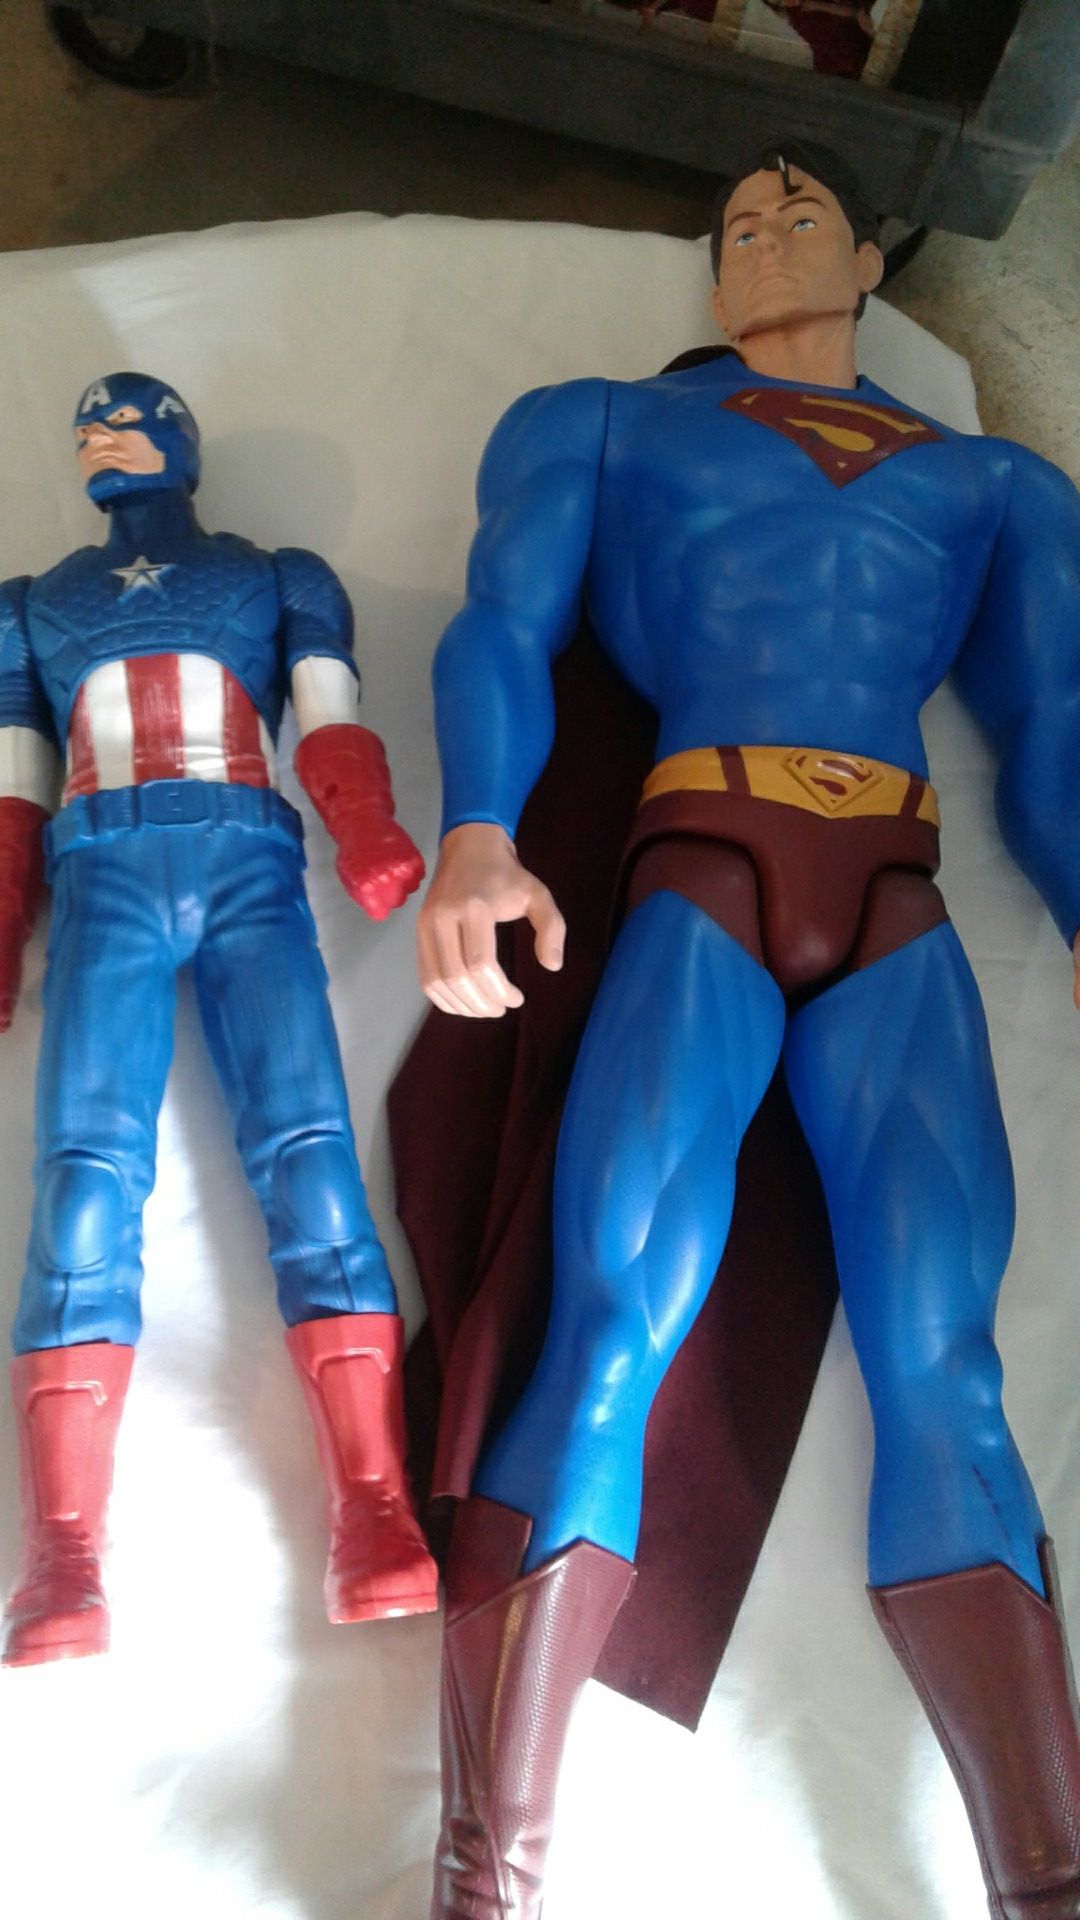 Captain America and Superman figures